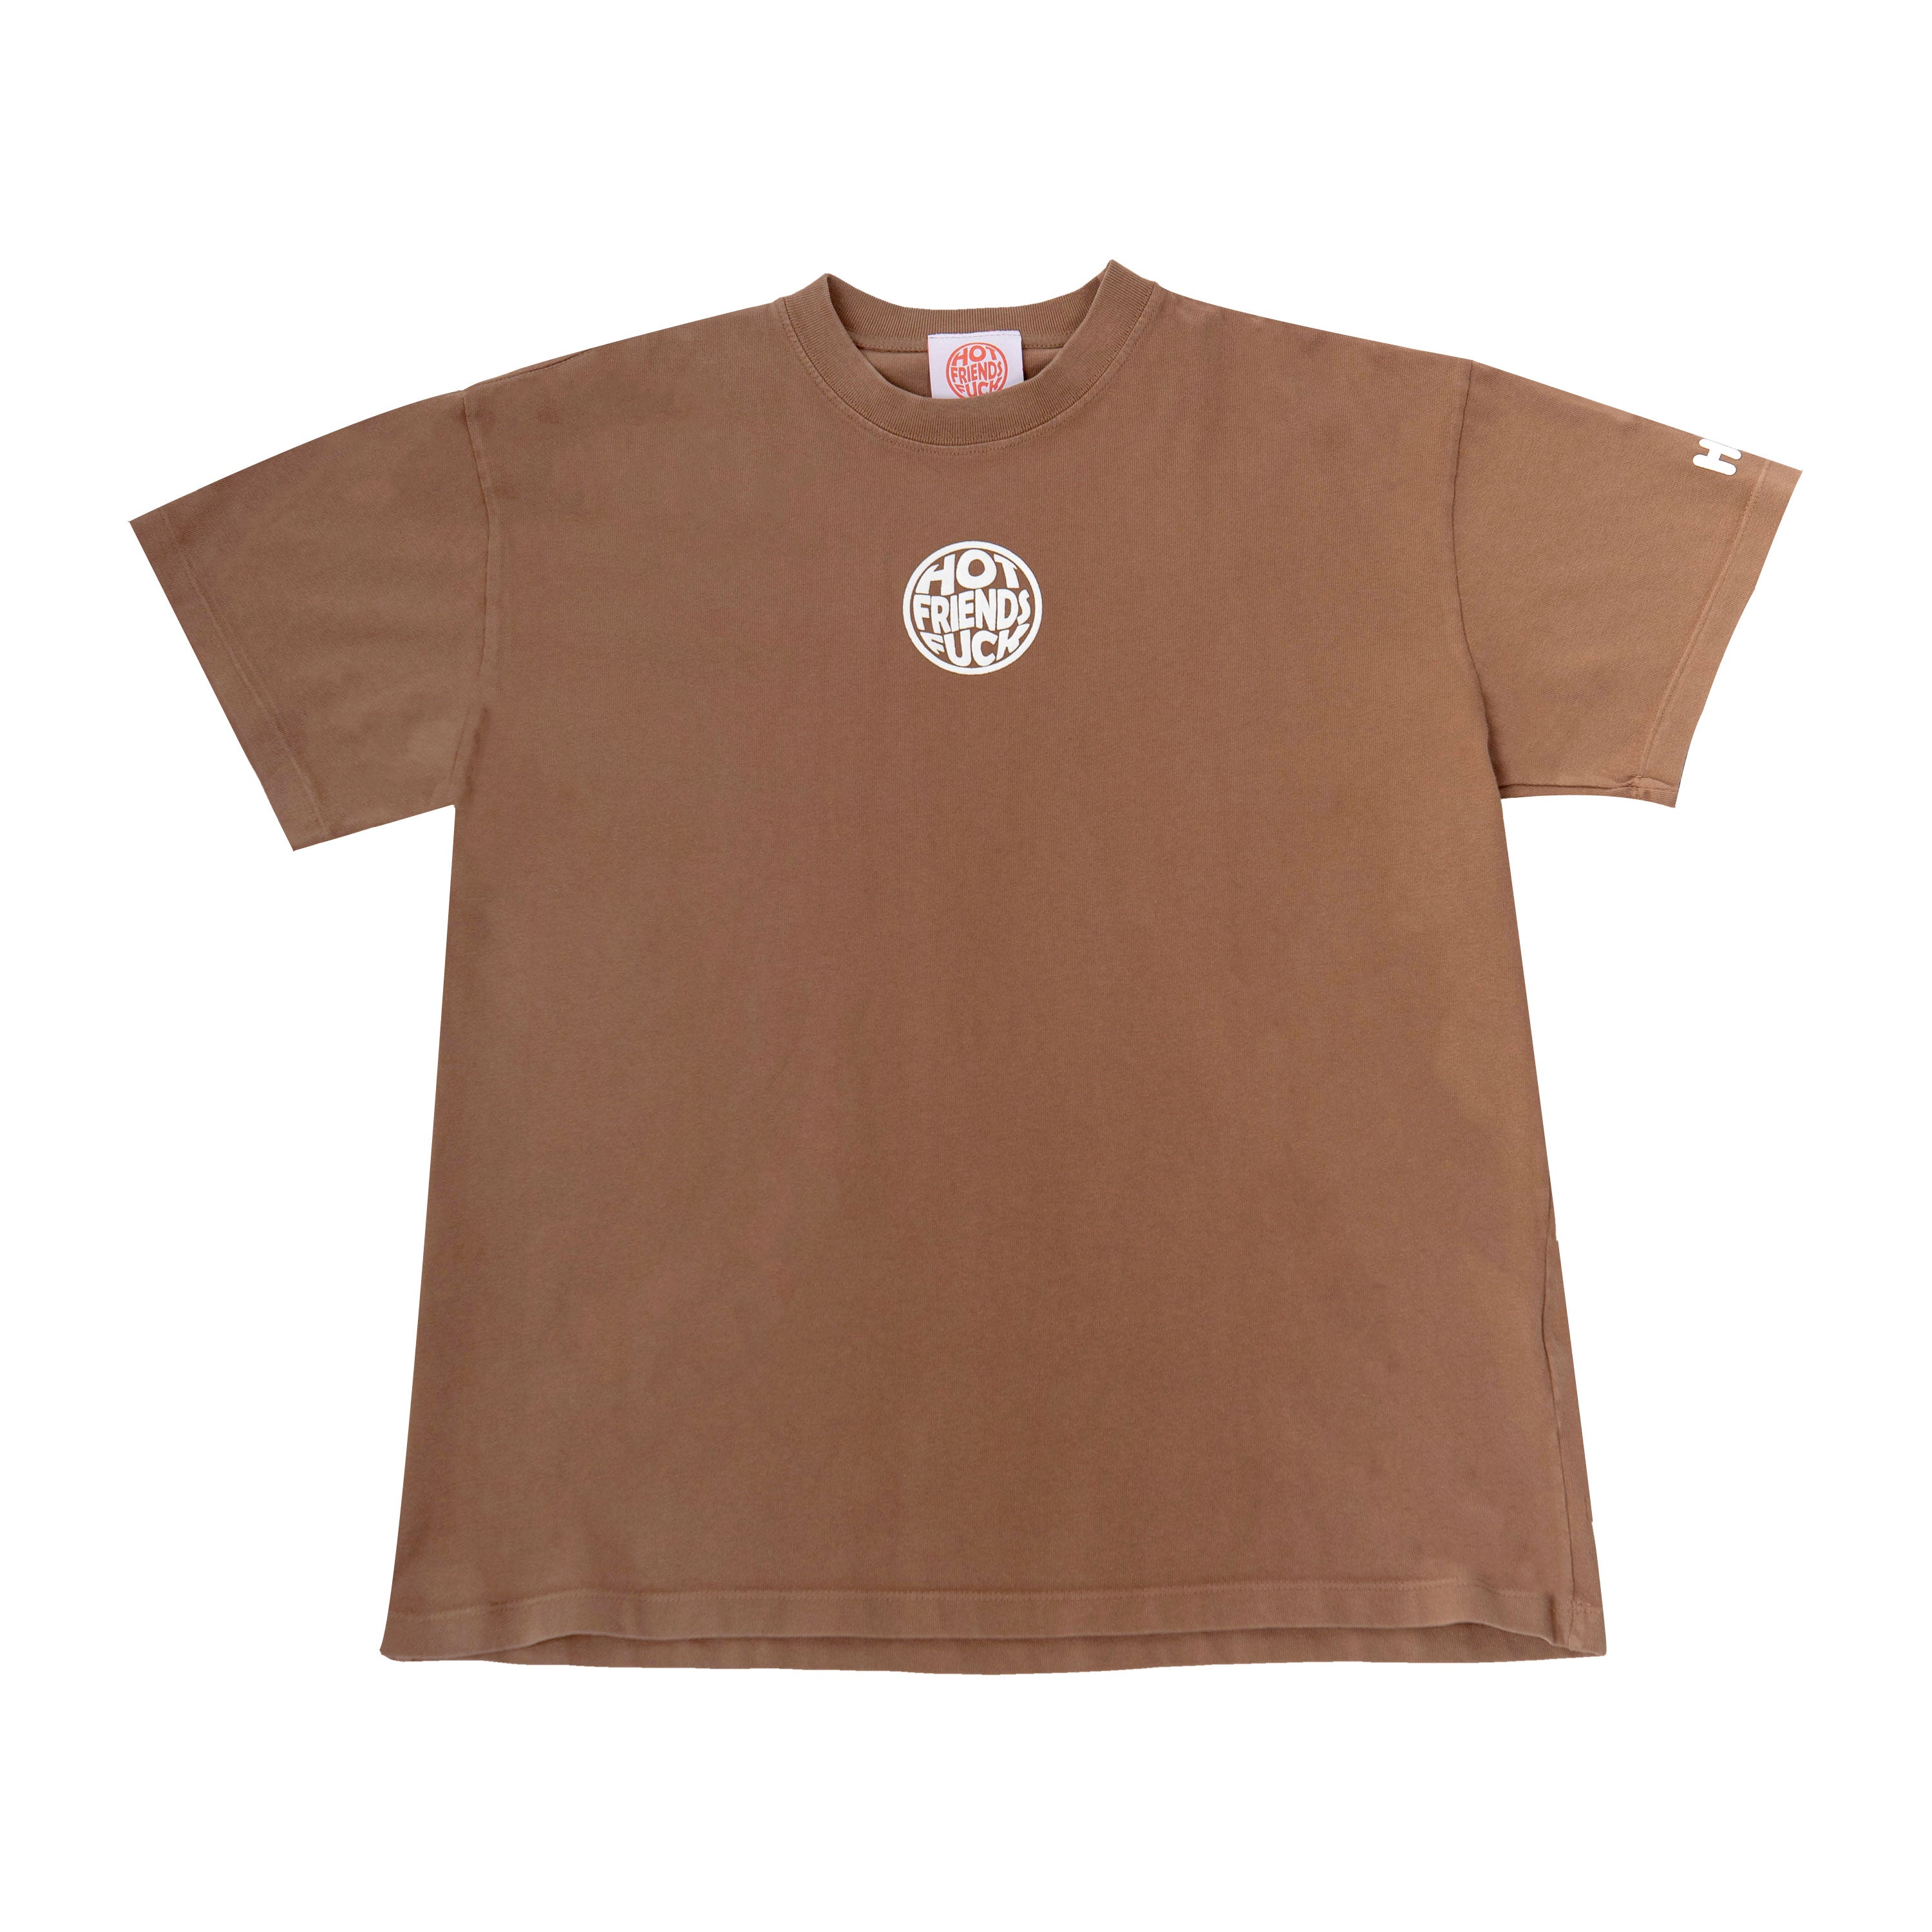 Brown Shirt with White Puff Print.